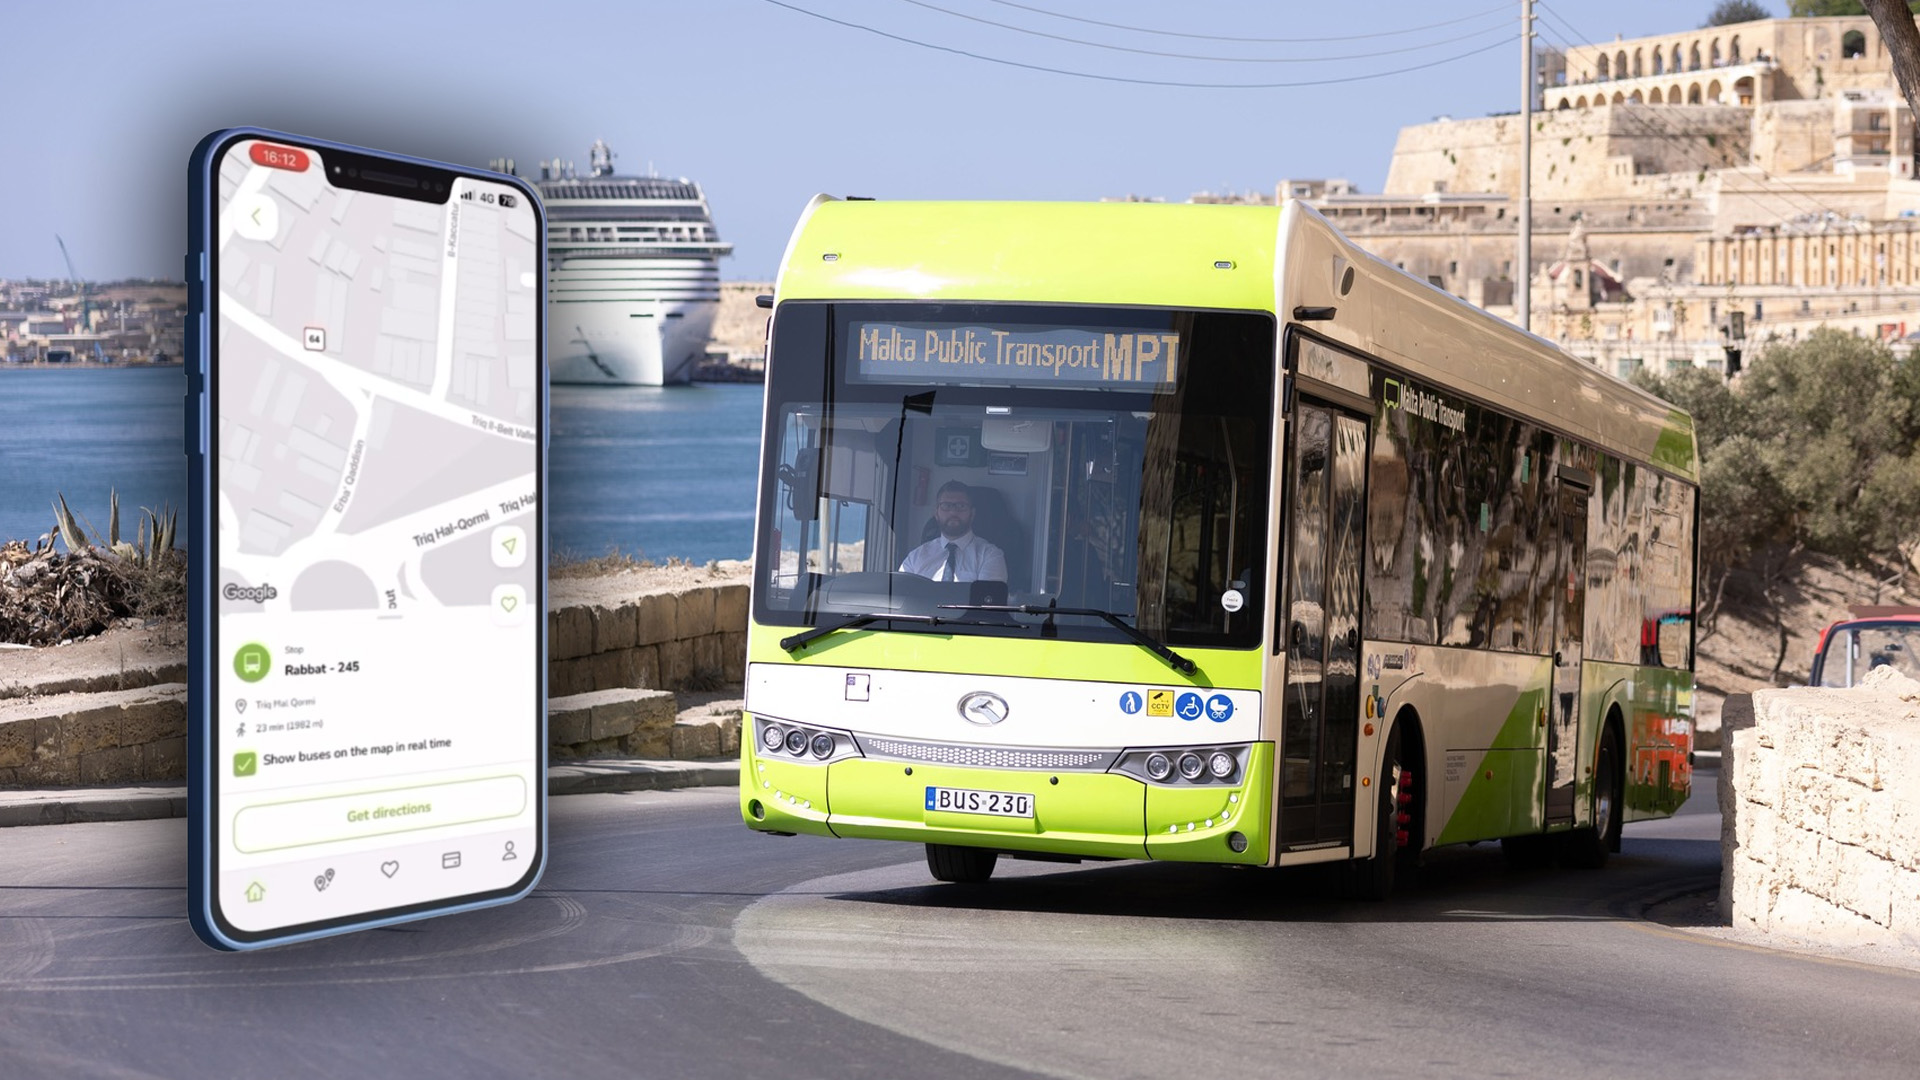 On The Way! Track Your Bus In Real Time On The Tallinja App